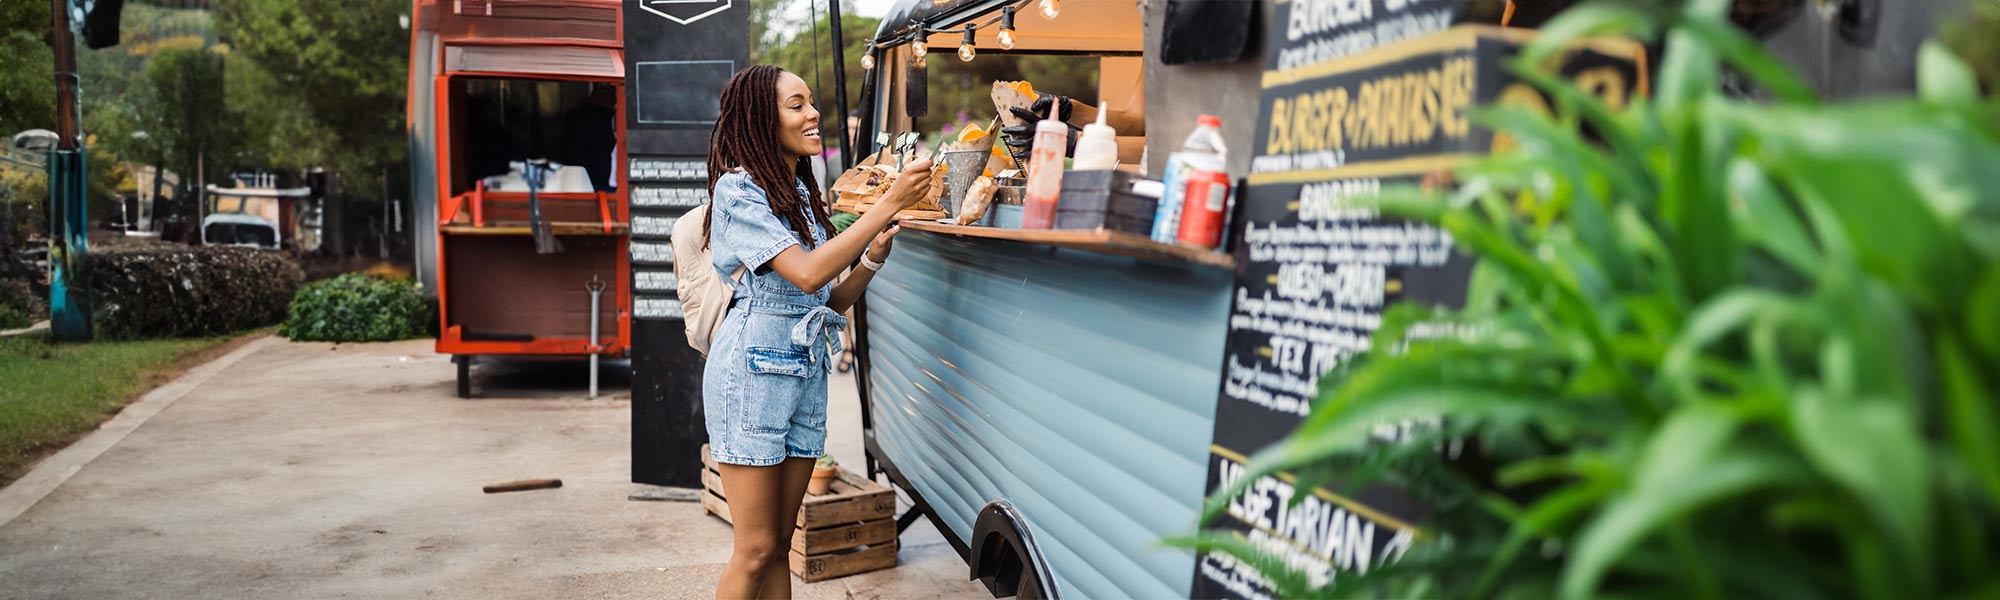 woman getting food from a food truck